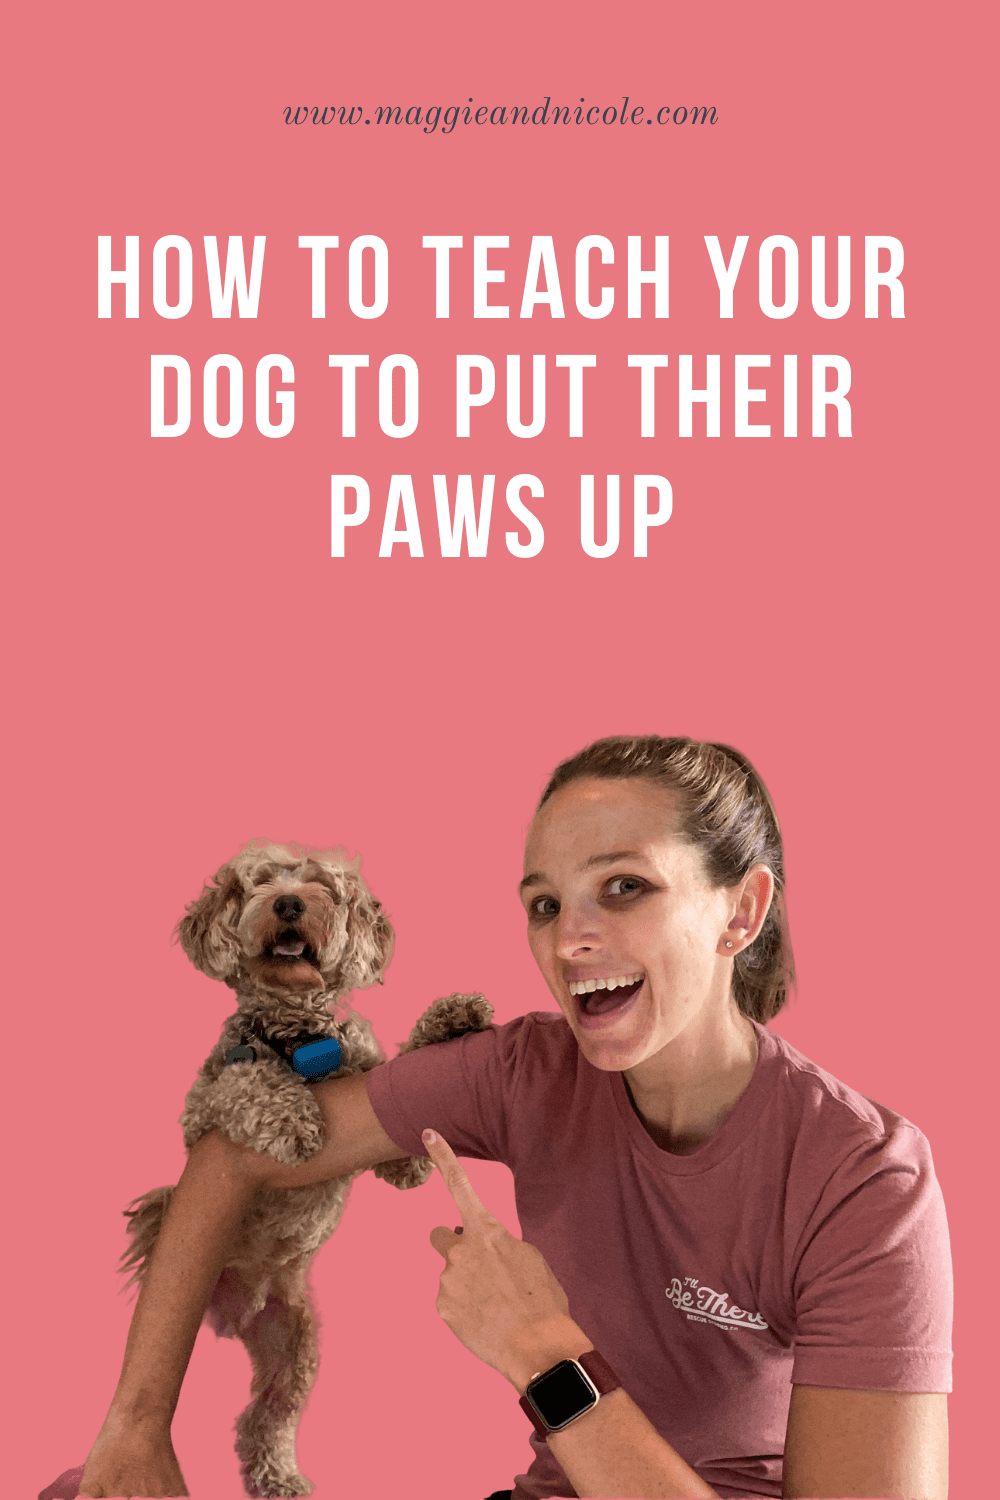 Teaching your dog paws up